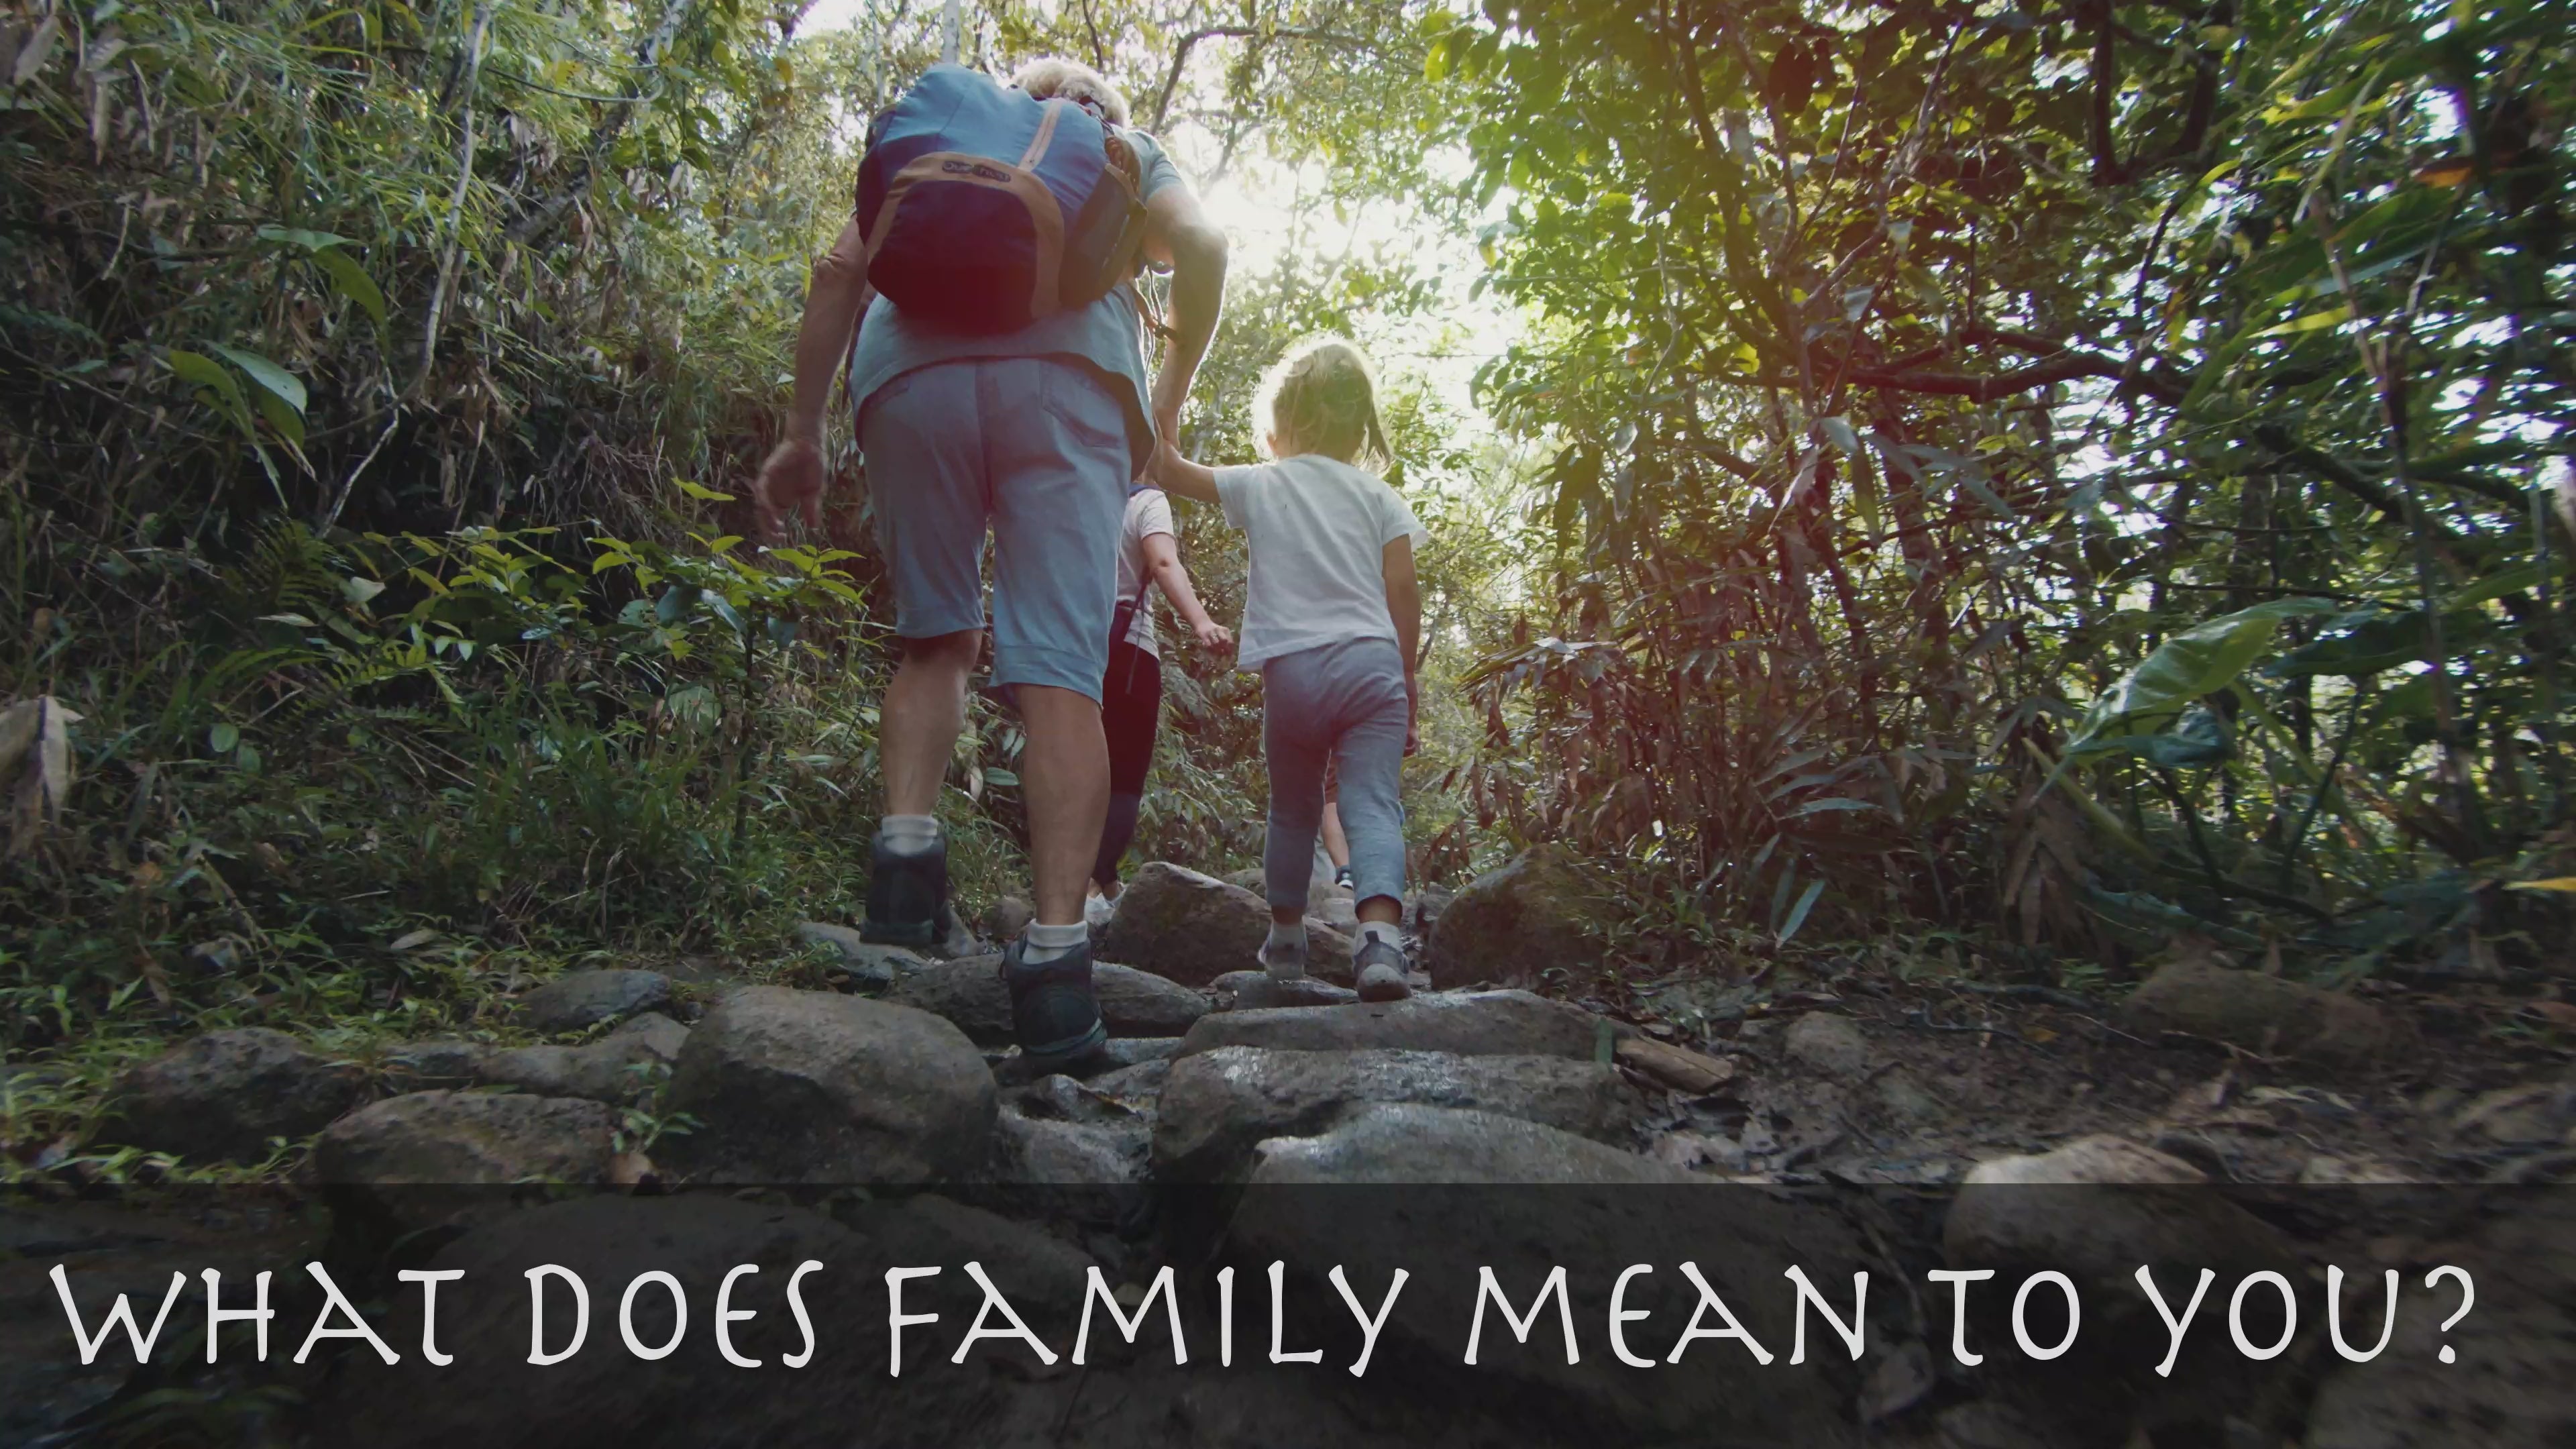 Load video: Family means everything to us